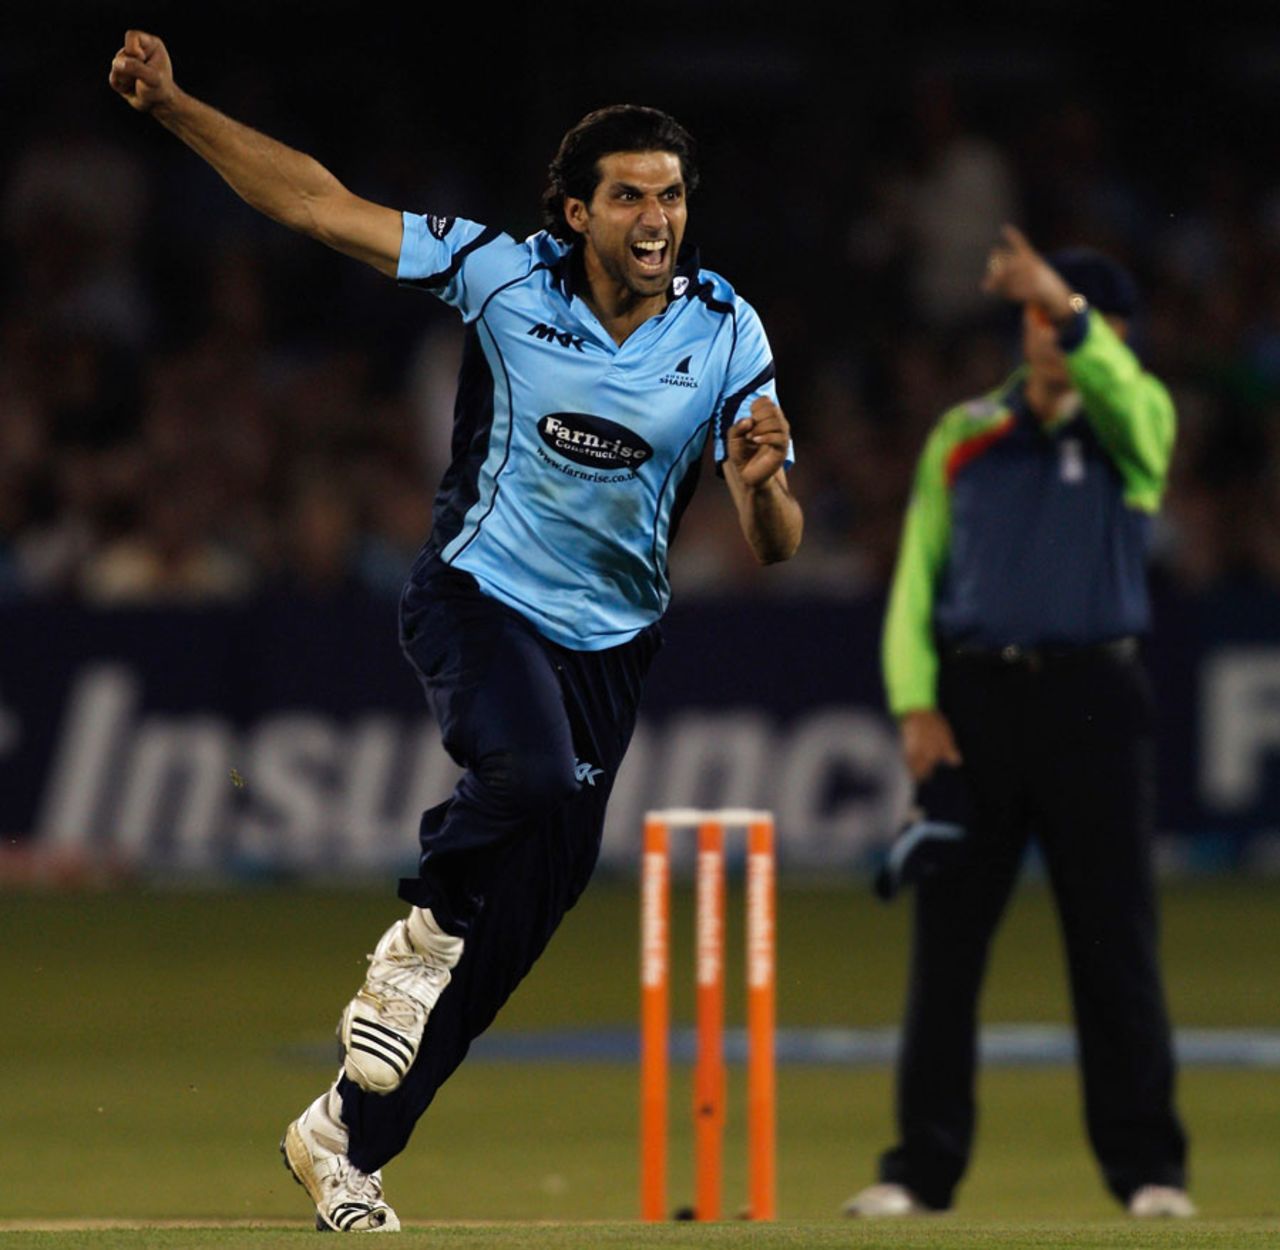 Amjad Khan took the wicket of Hamish Marshall, Sussex v Gloucestershire, Friends Life T20, Hove, July, 24, 2012